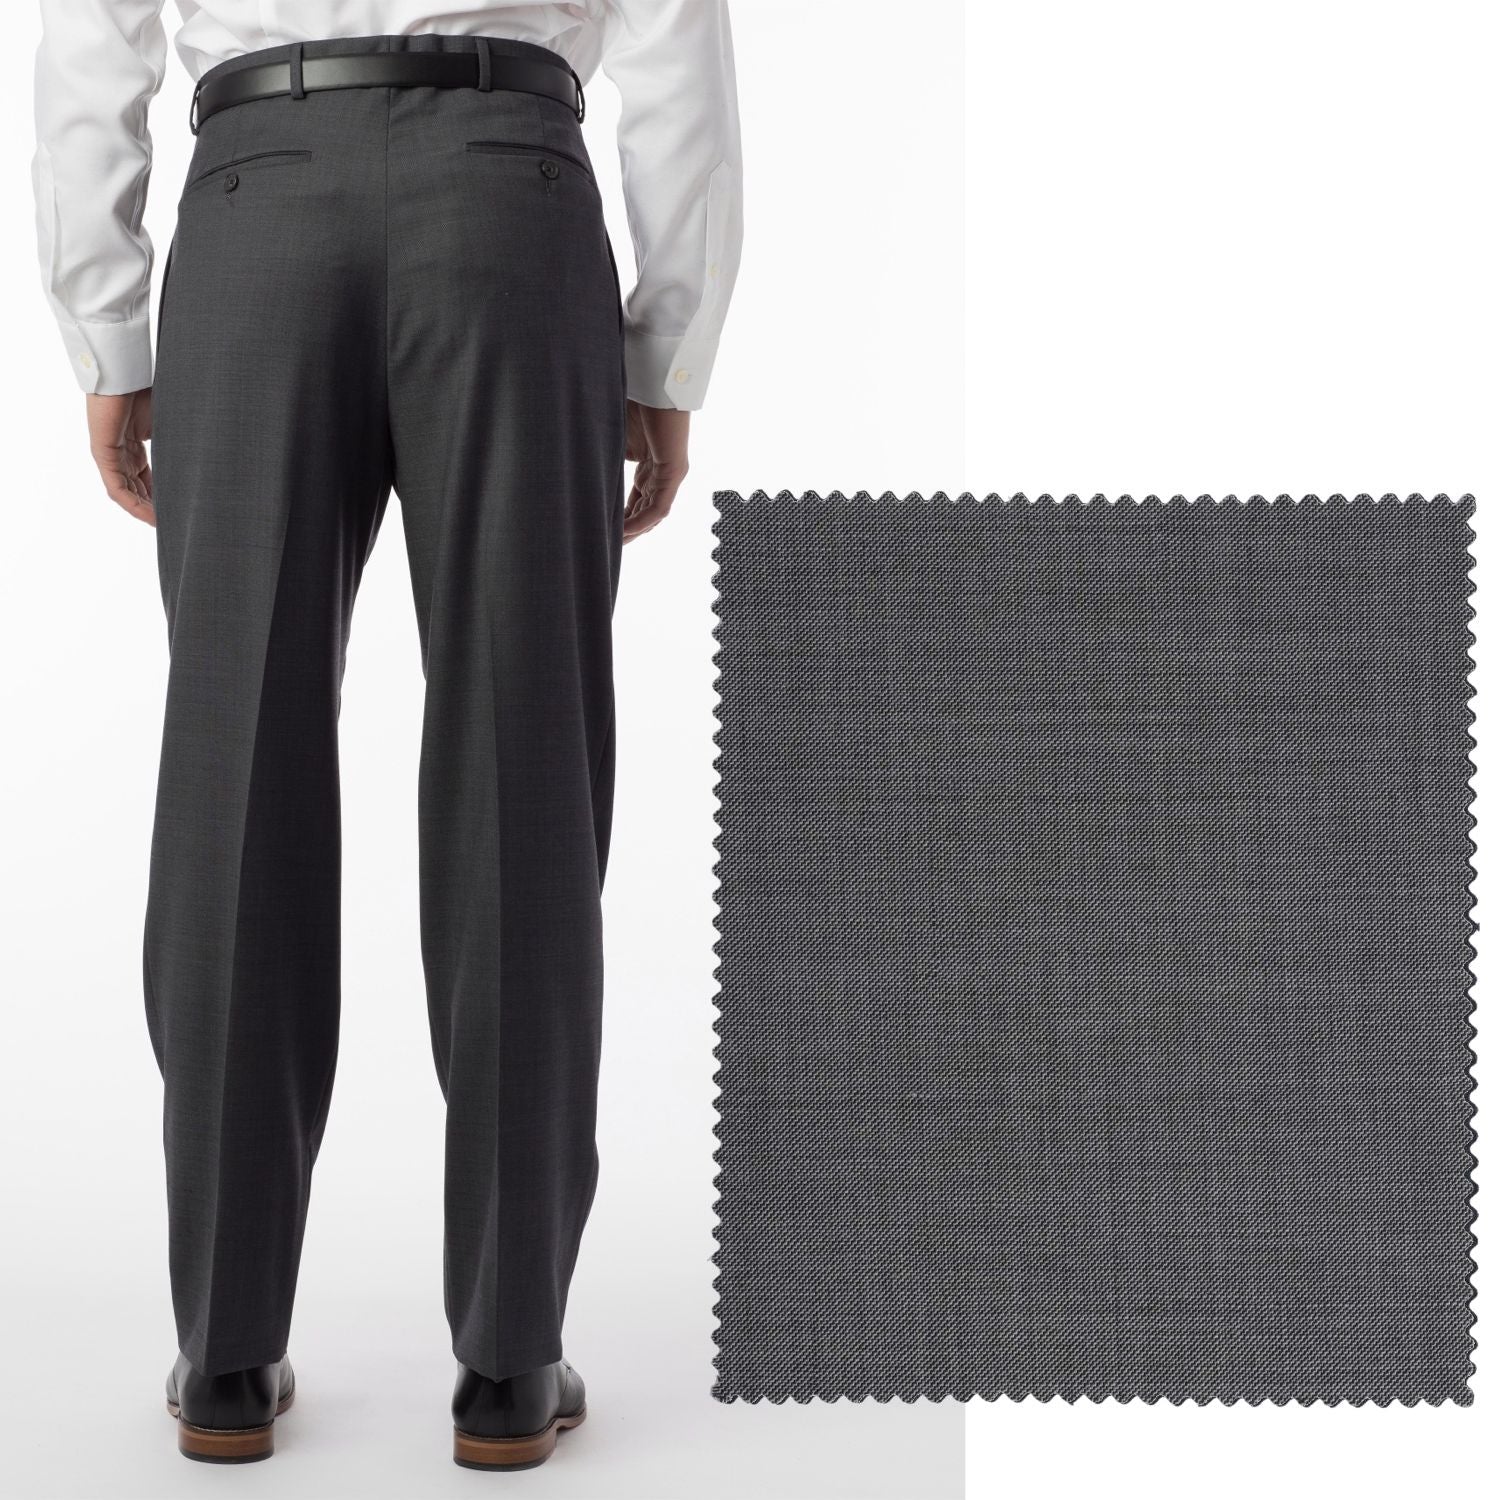 Sharkskin Super 120s Worsted Wool Comfort-EZE Trouser in Medium Grey (Manchester Pleated Model) by Ballin